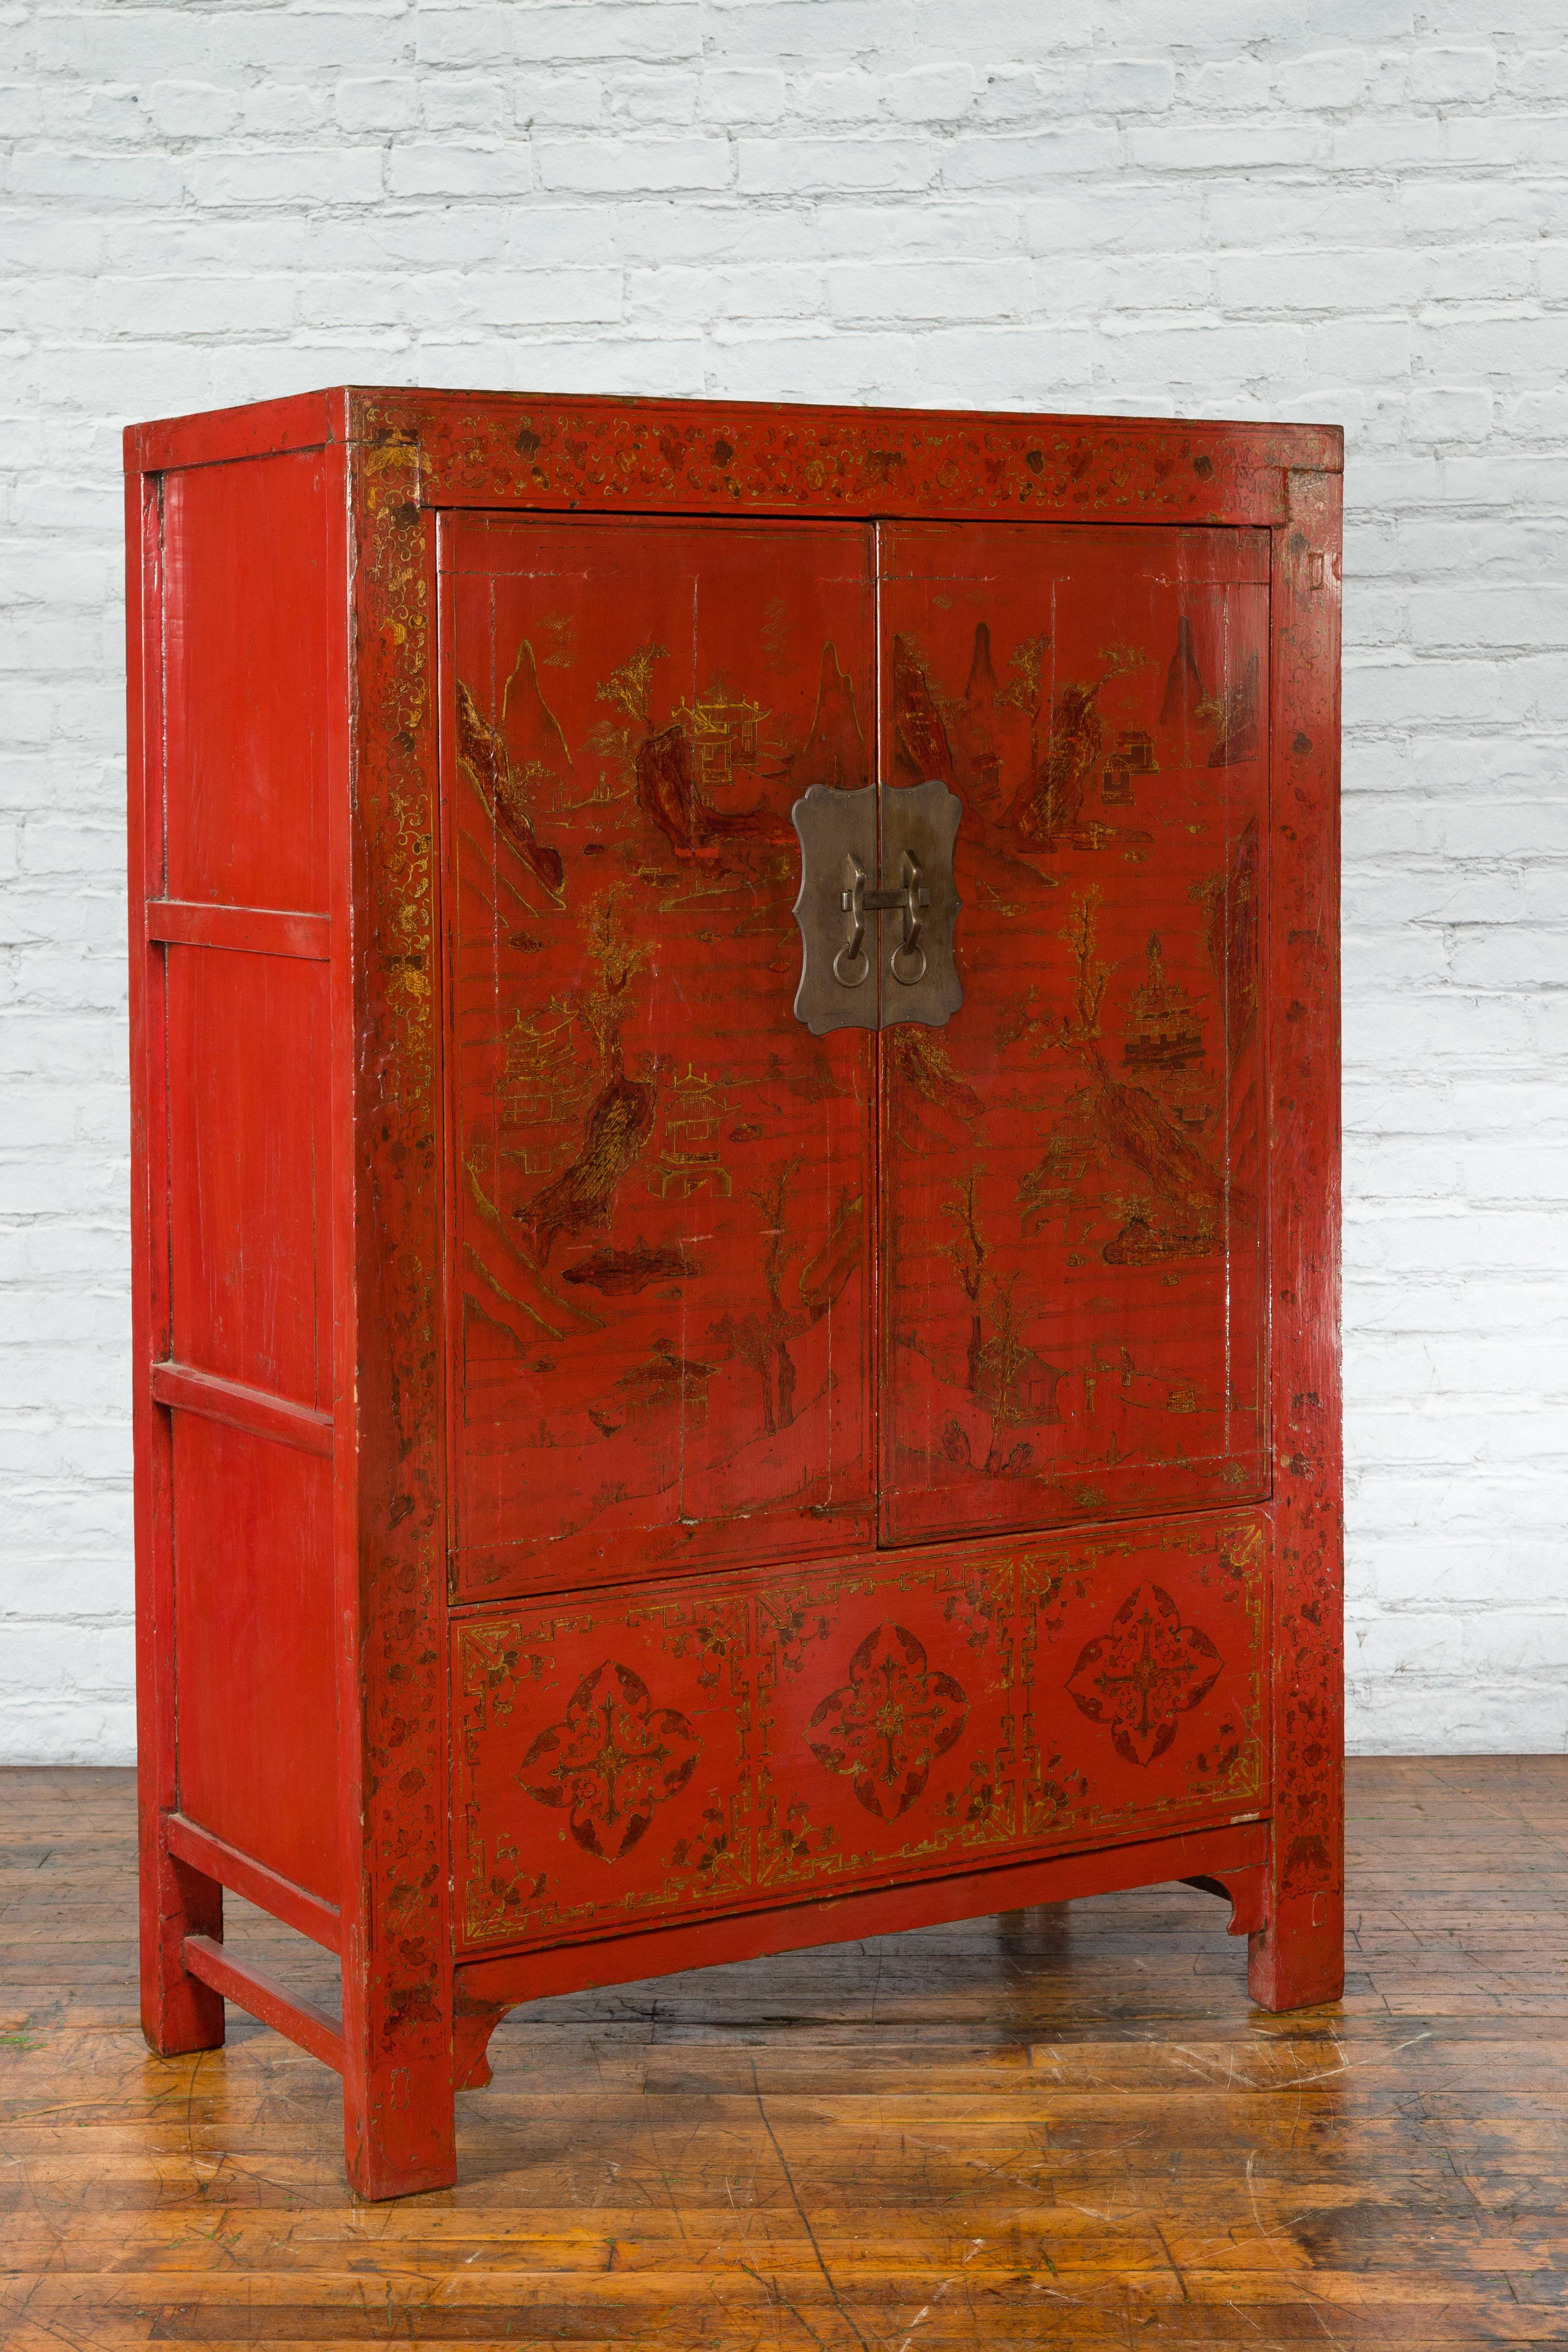 A Chinese Qing Dynasty period red lacquer cabinet from the 19th century, with two doors and hand-painted décor. Created in China during the Qing Dynasty, this cabinet captures our attention with its red lacquer beautifully adorned with a gilded